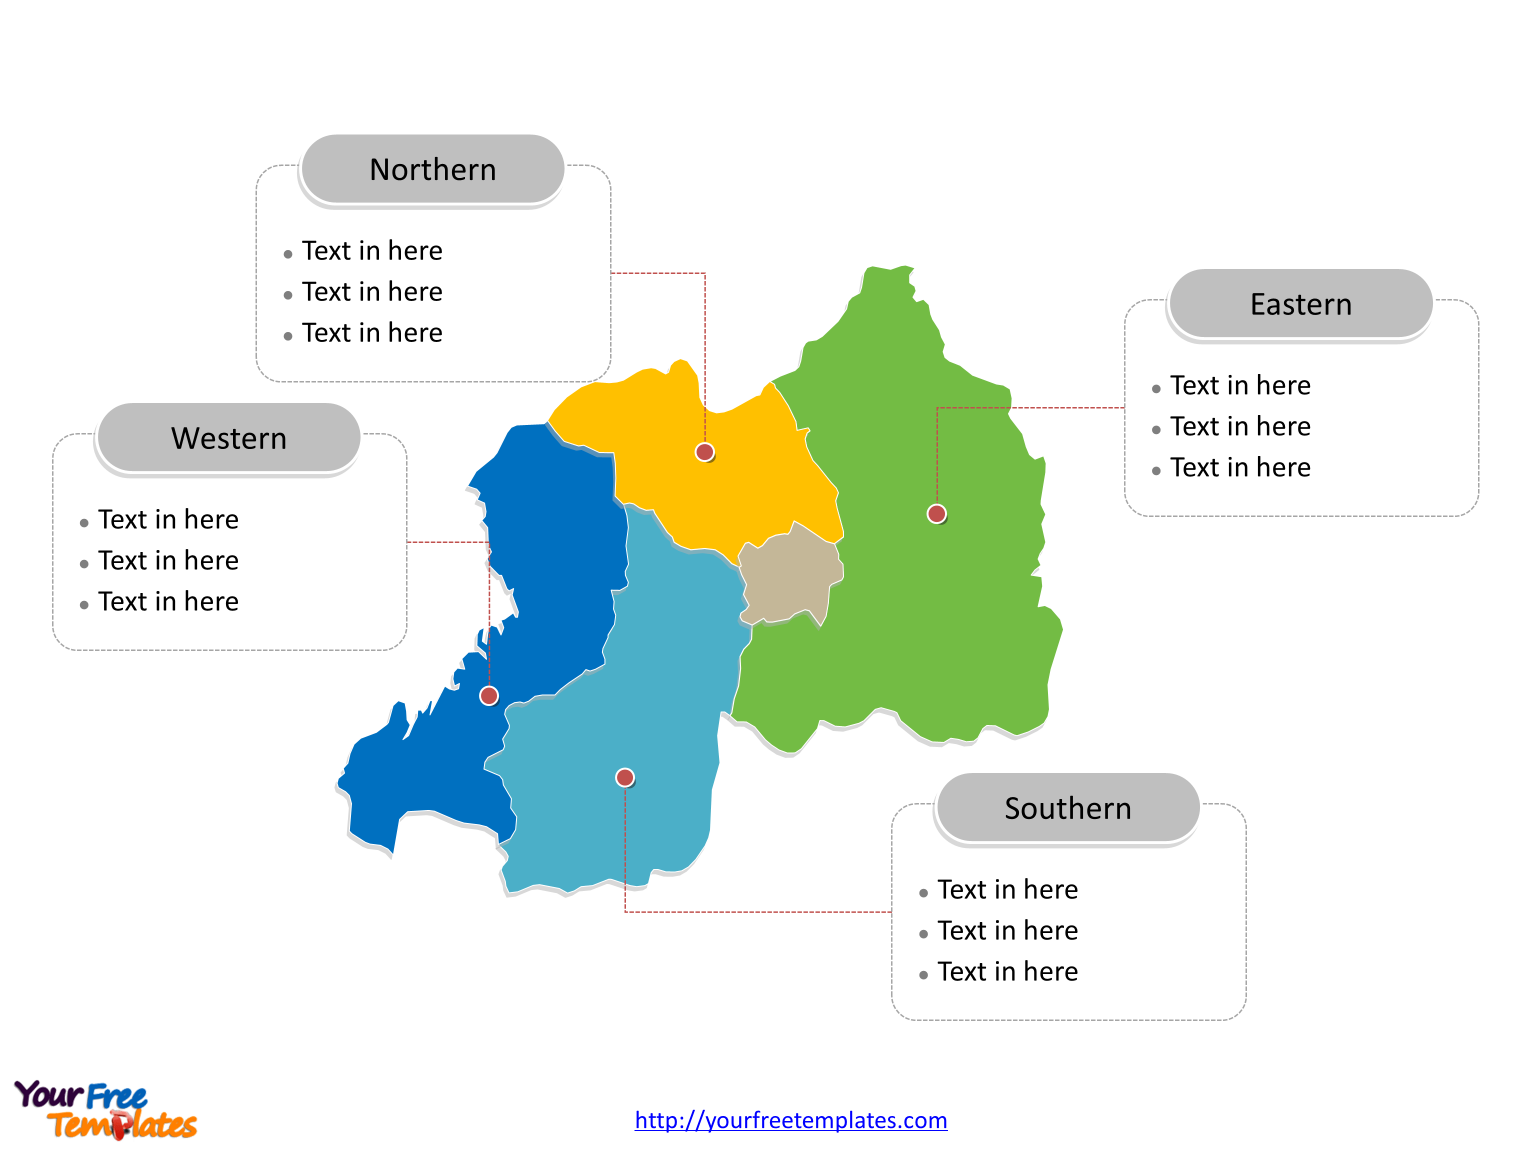 Rwanda Political map labeled with major provinces